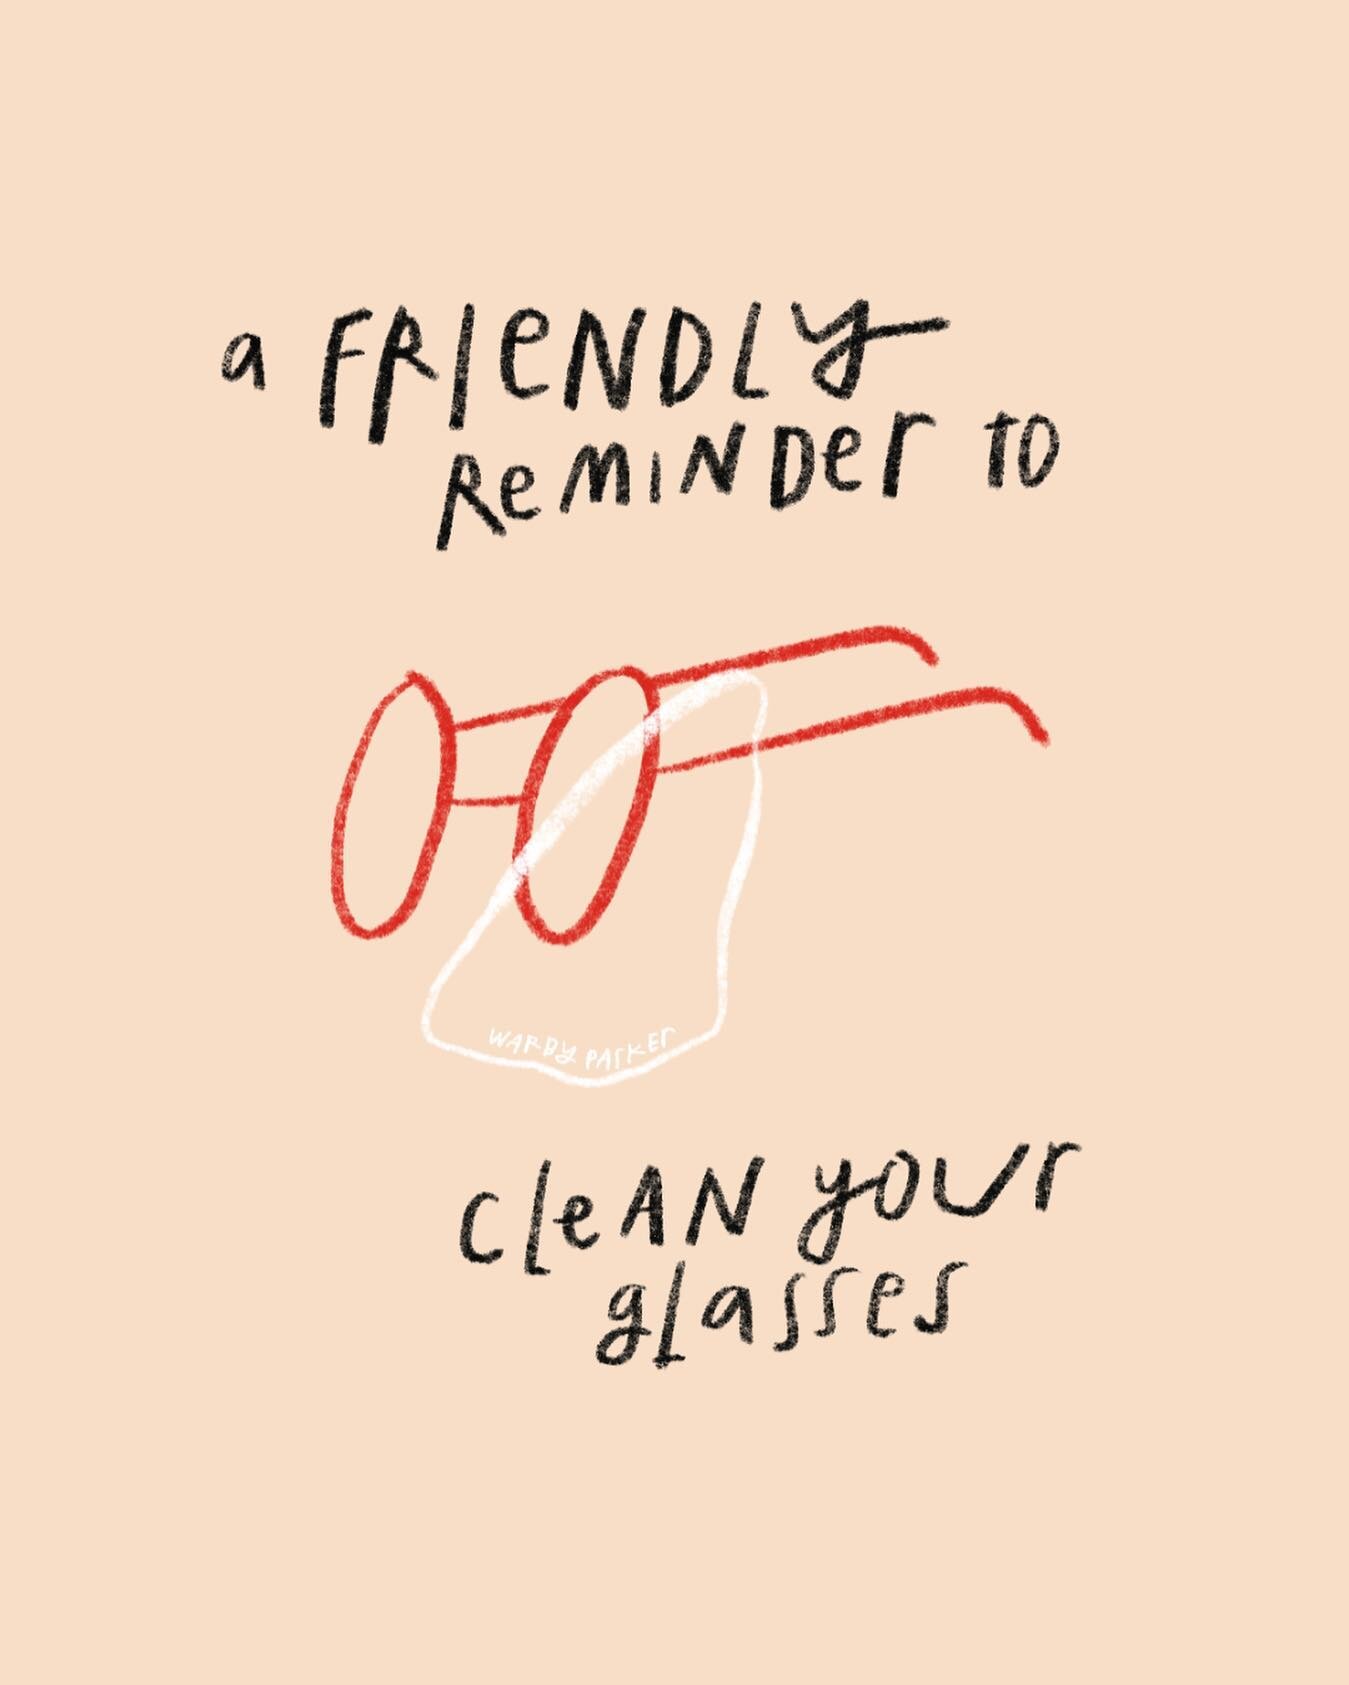 PSA for my fellow four eyed friends 👓
i think @warbyparker has the best cleaning cloths &macr;\_(ツ)_/&macr; 

won&rsquo;t lie&hellip;sometimes i&rsquo;m amazed at how much my glasses protect me from my own eyelashes and dust 😭 
..
..
..

#procreate